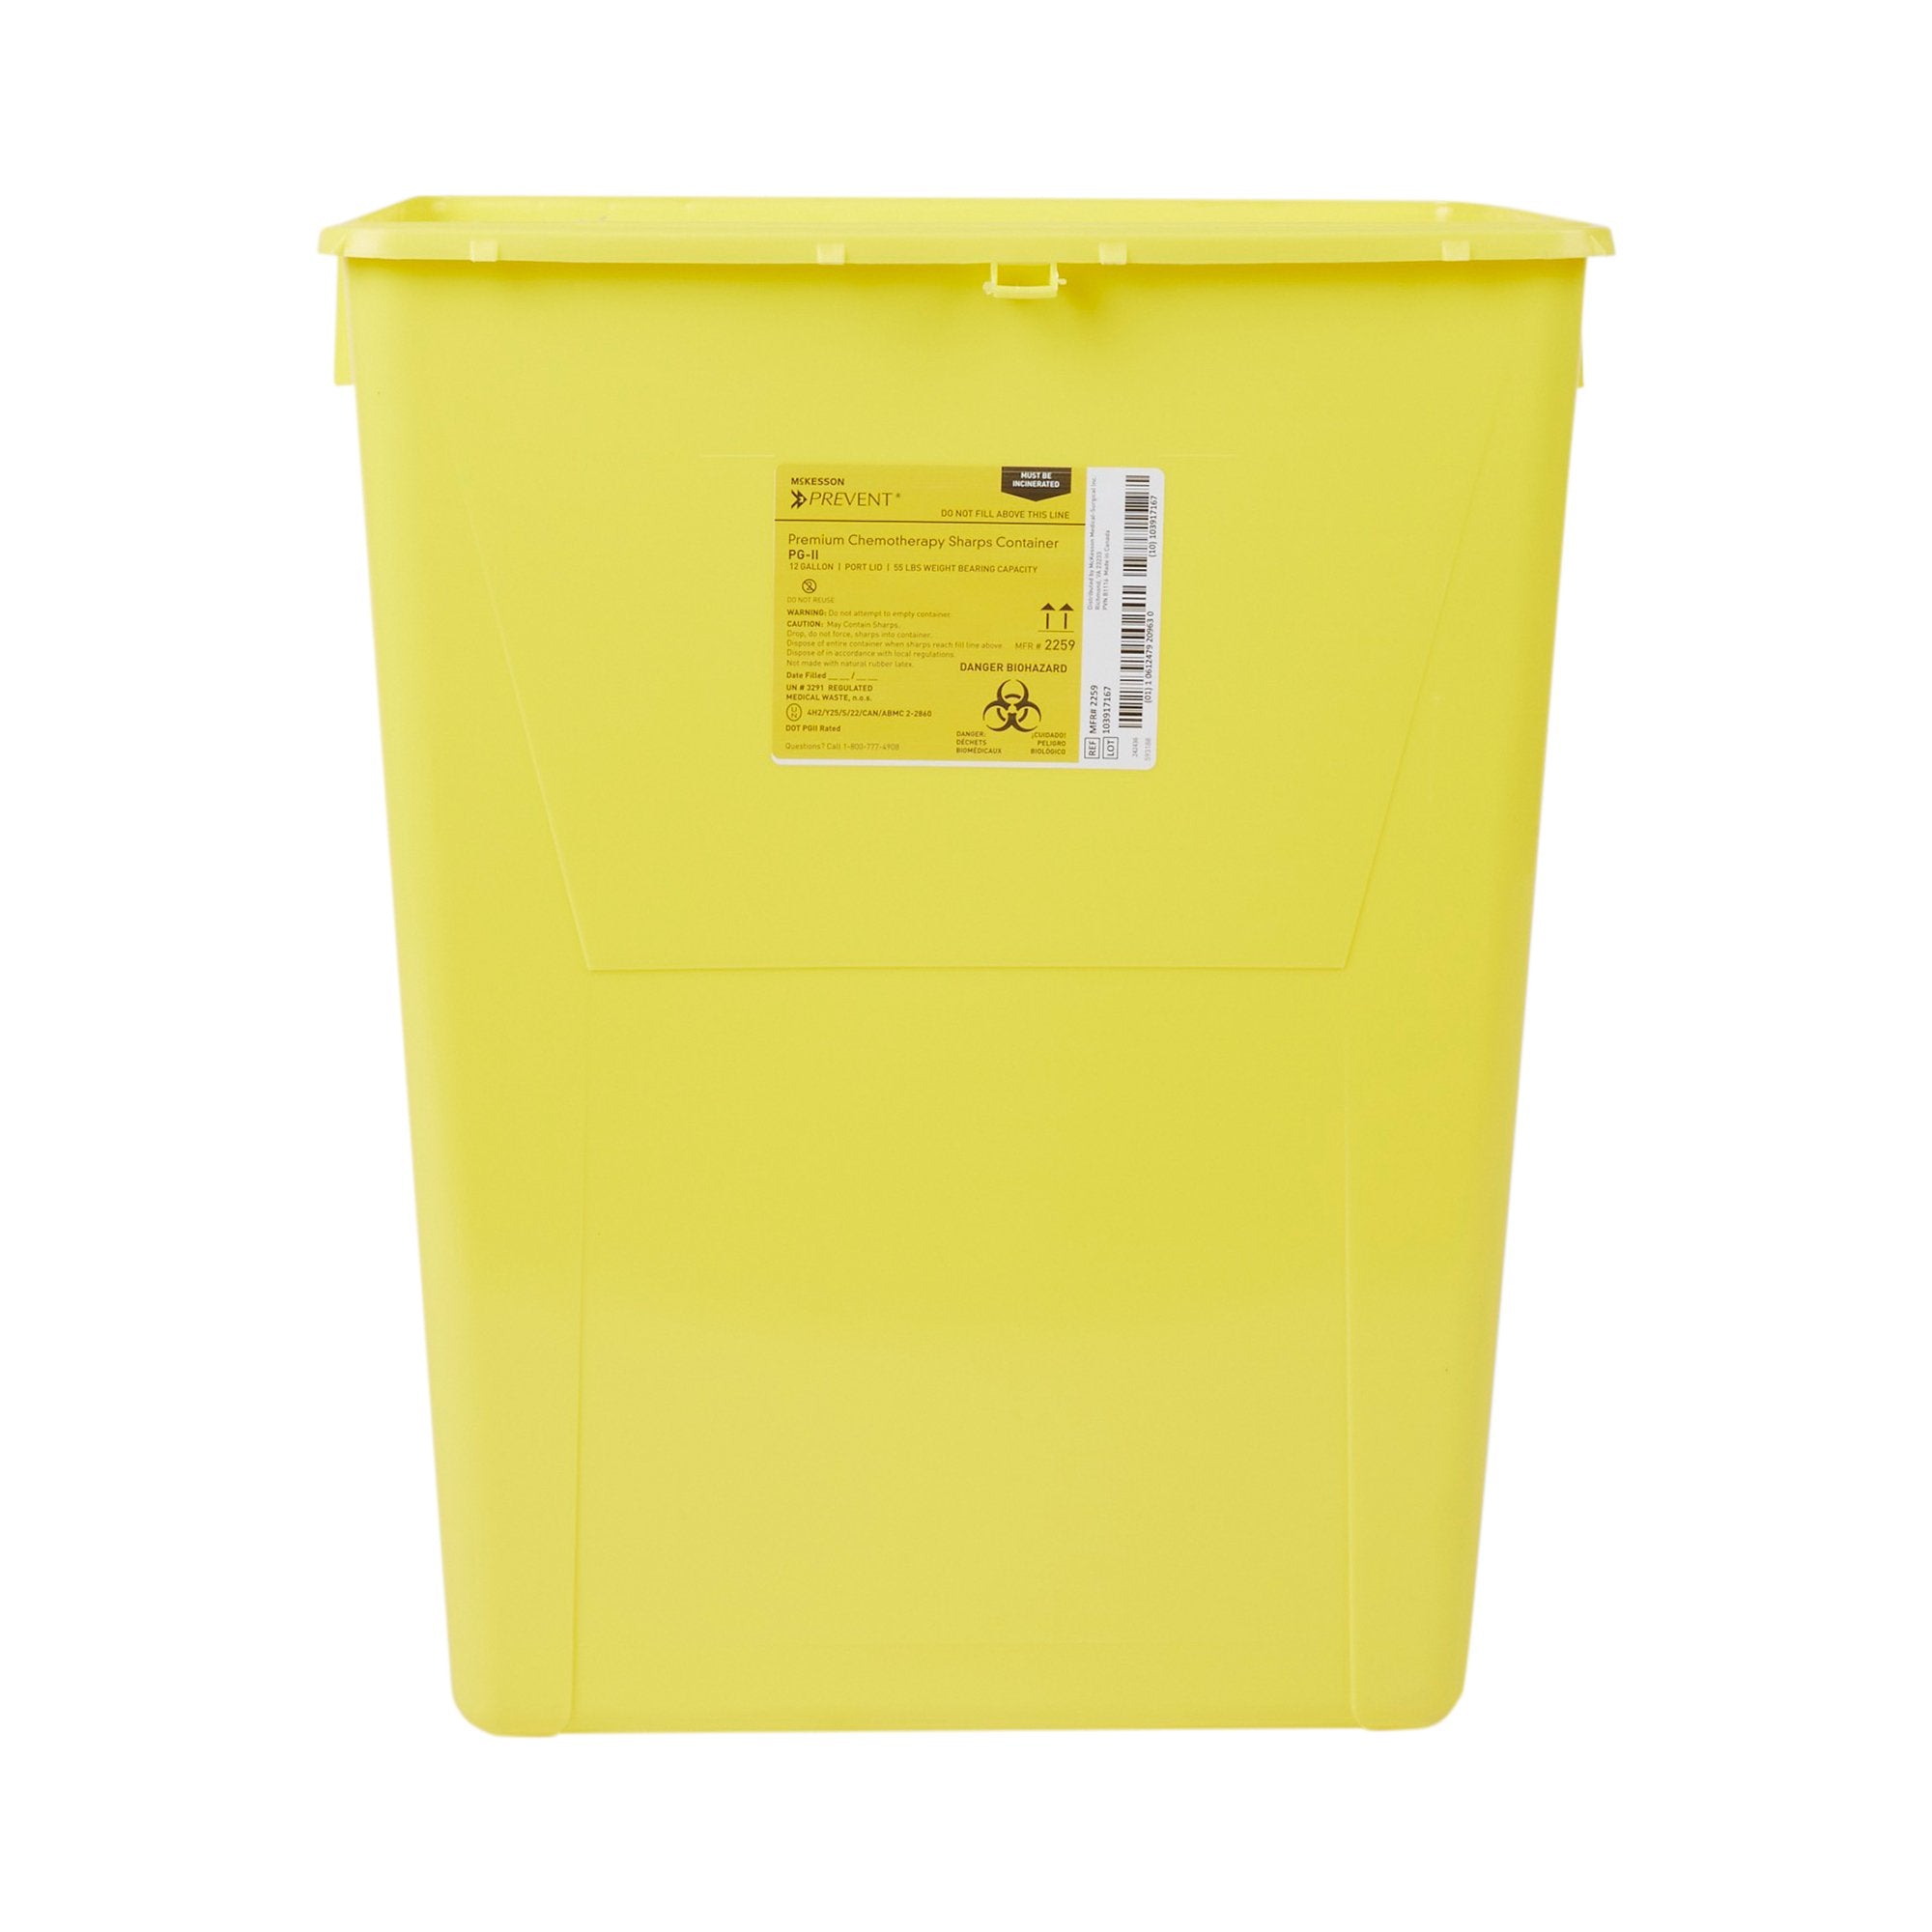 Chemotherapy Waste Container McKesson Prevent® Yellow Base 20-4/5 H X 17-3/10 W X 13 L Inch Vertical Entry 12 Gallon